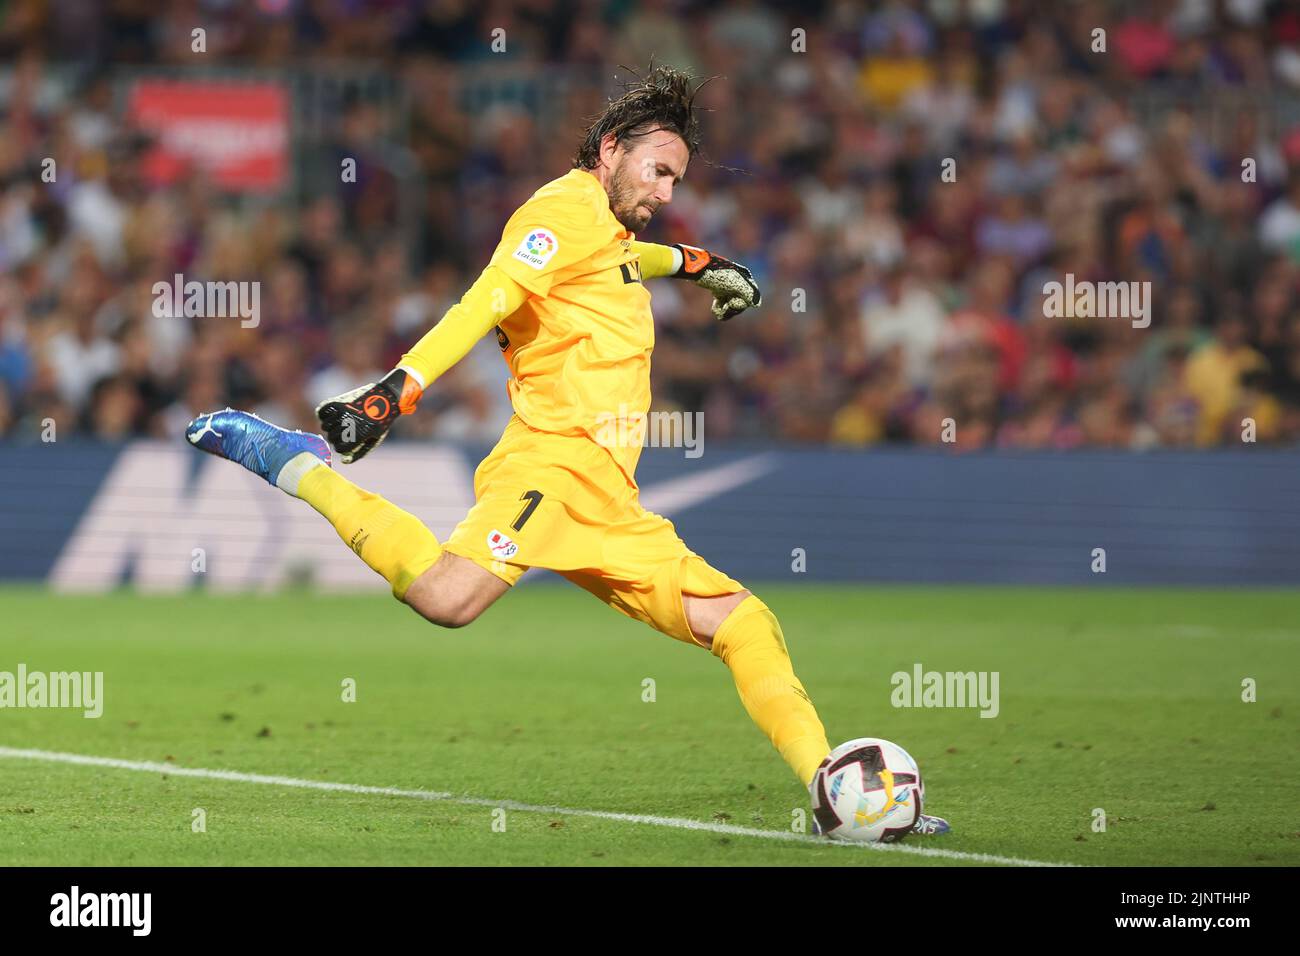 Stole Dimitrievski of Rayo Vallecano in action during the Liga match between FC Barcelona and Rayo Vallecano at Spotify Camp Nou in Barcelona, Spain. Stock Photo